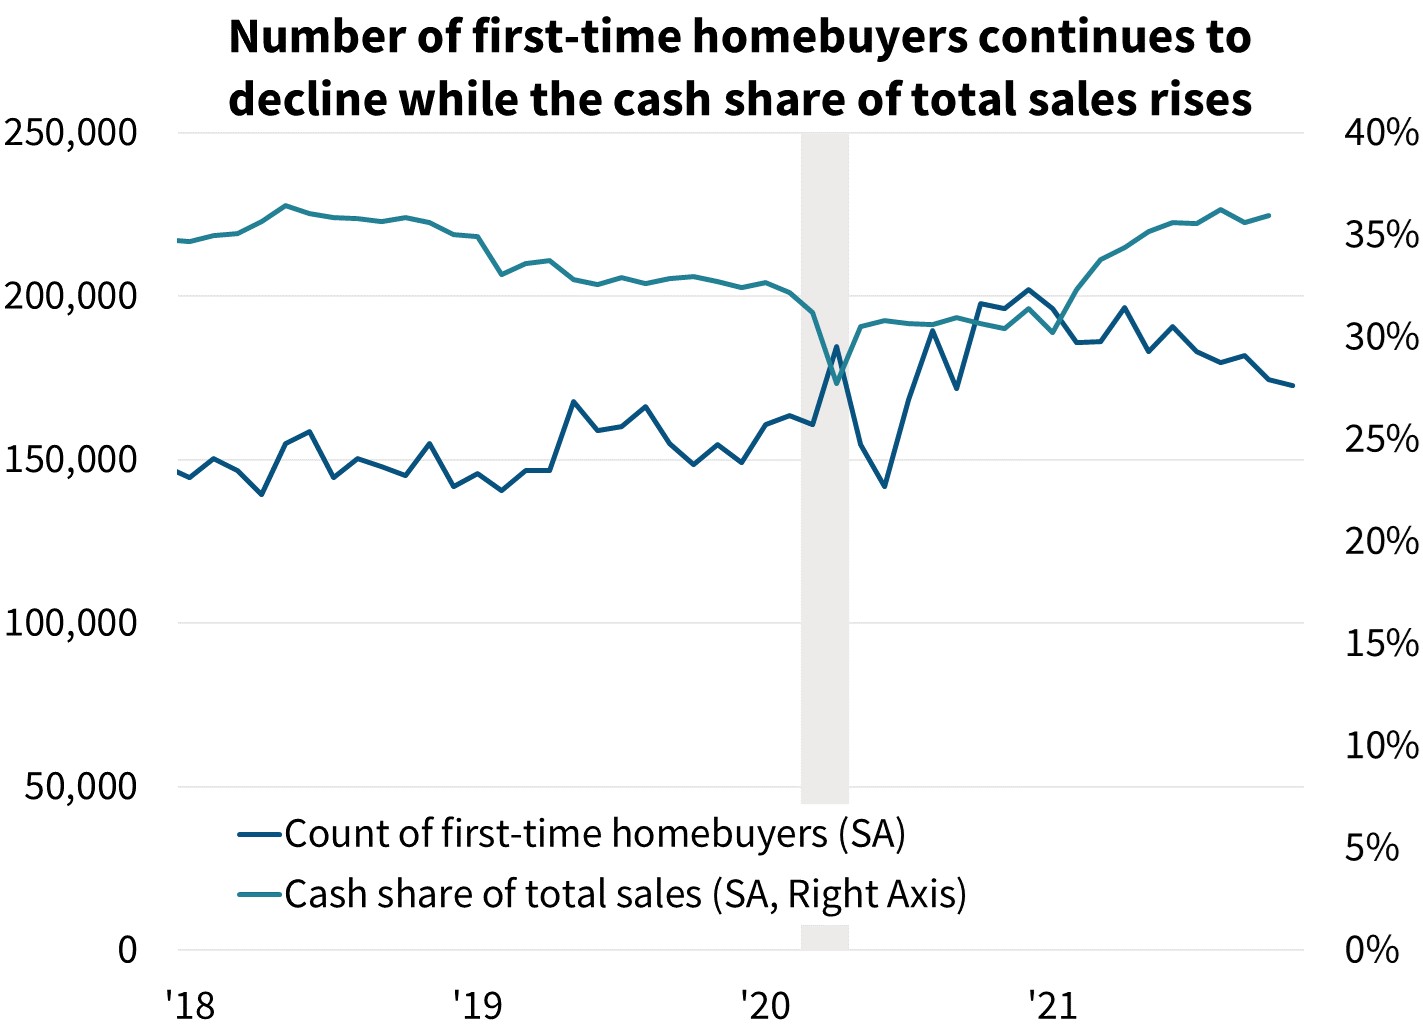 First-time homebuyers continue to decline while cash share of total sales rise